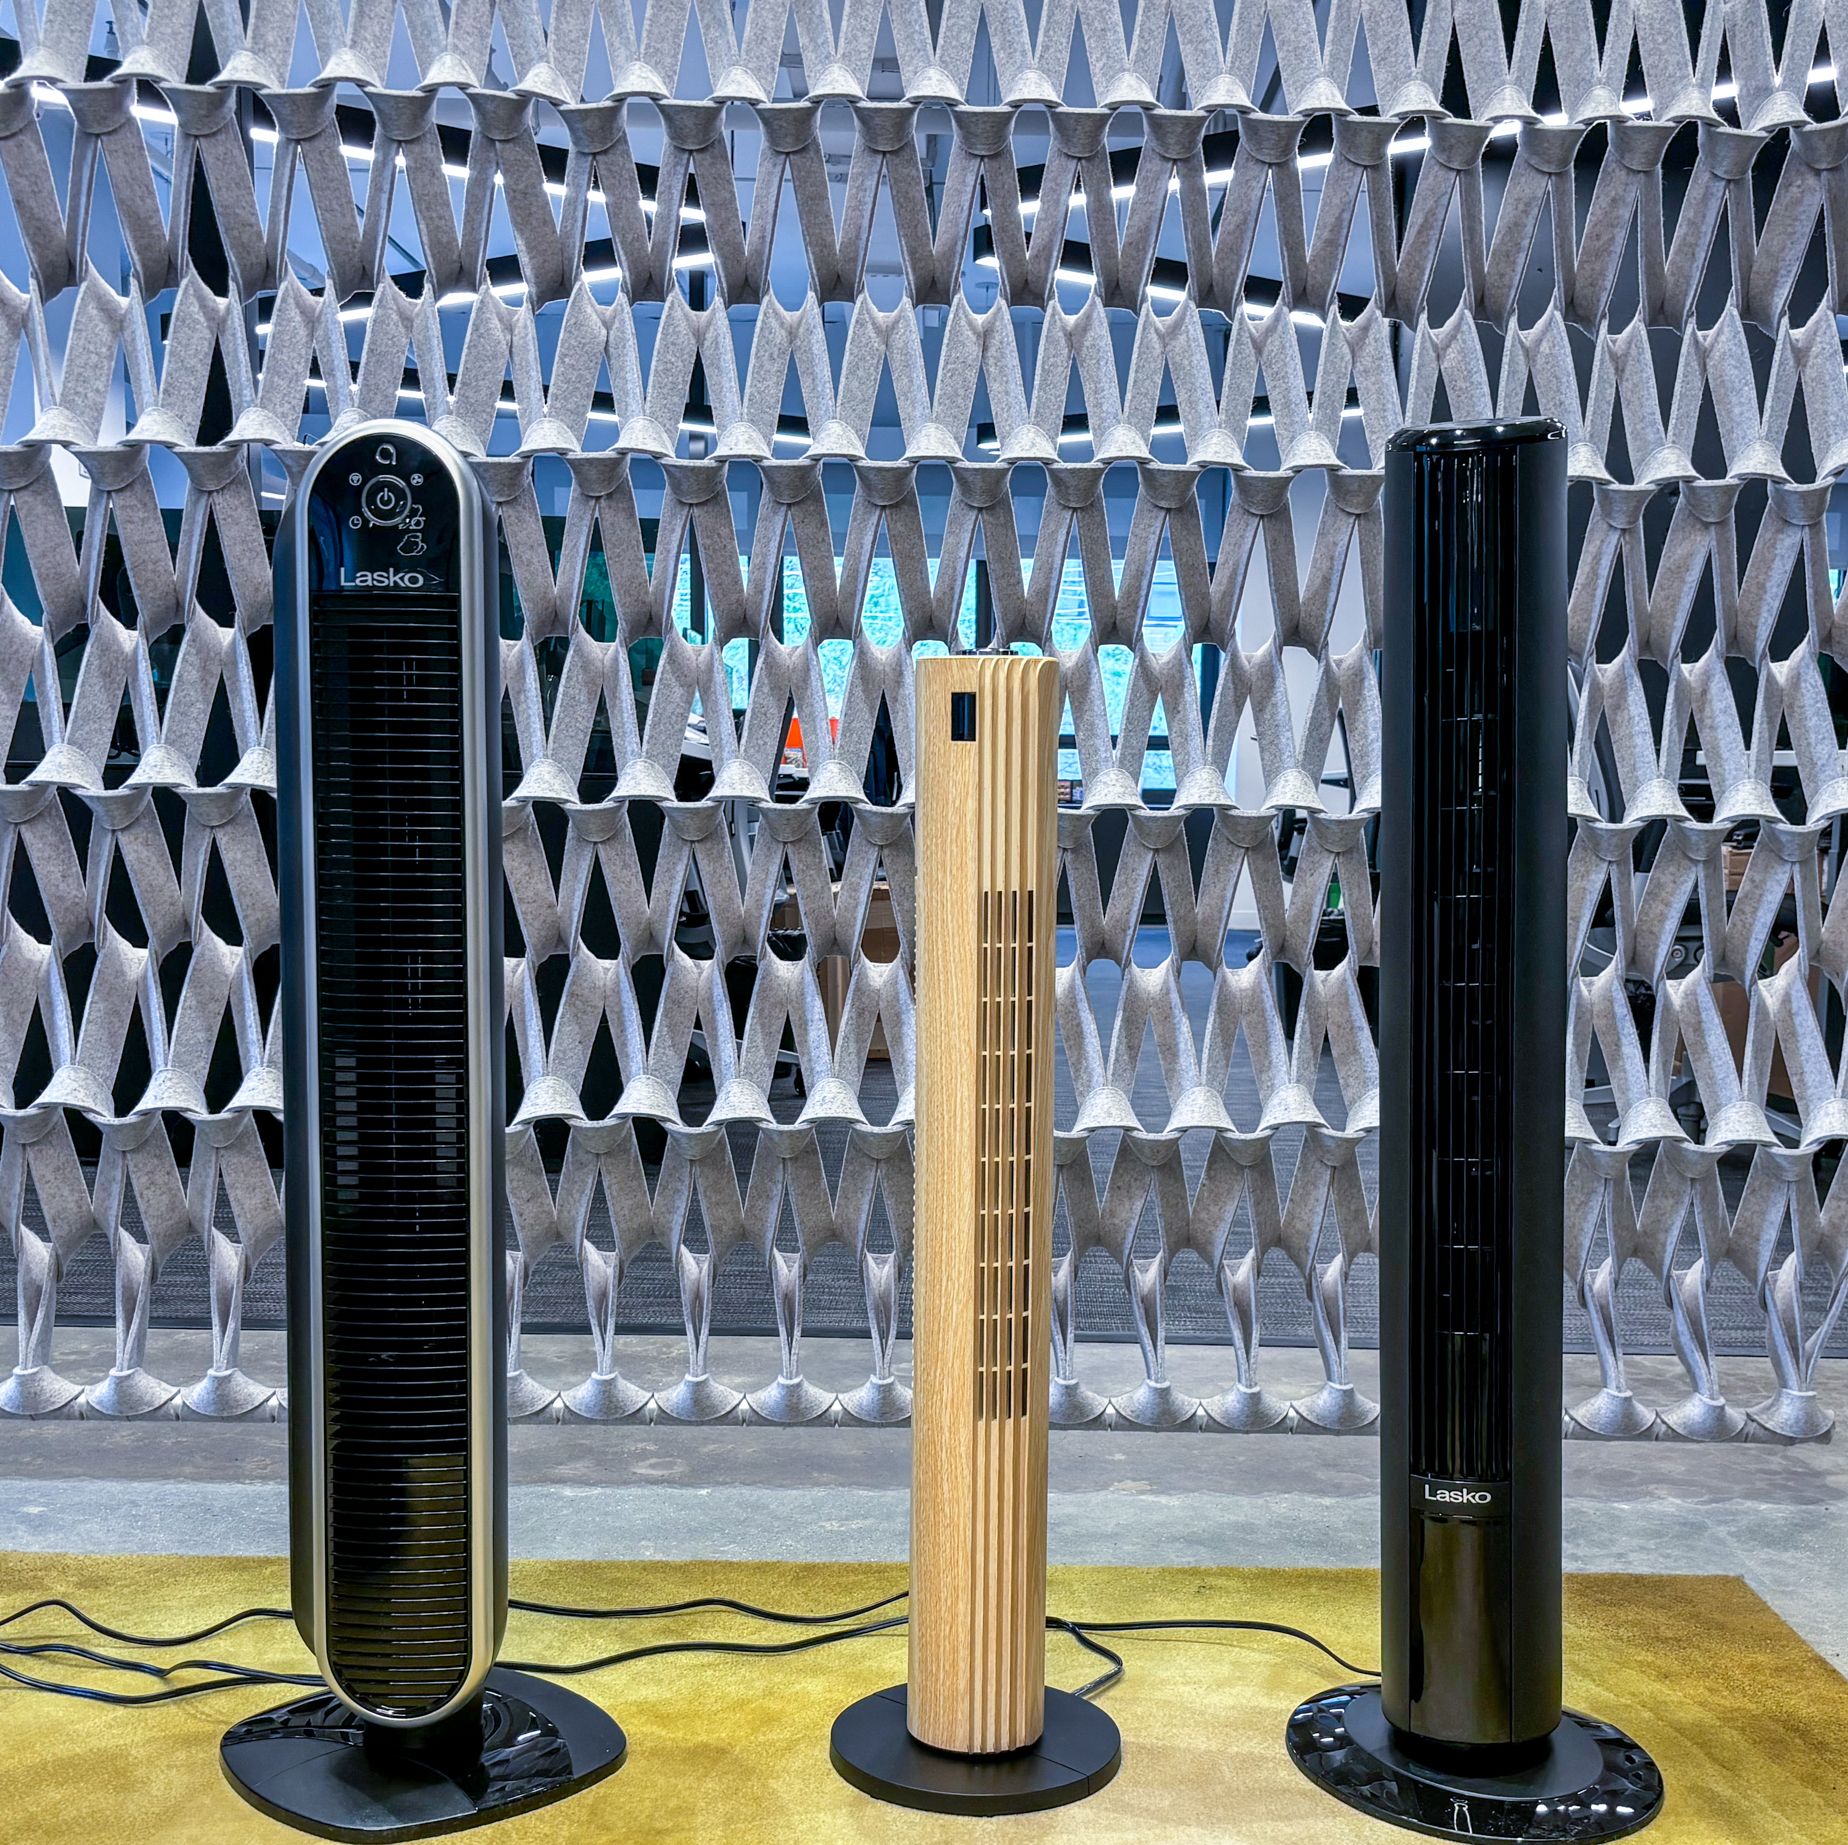 We Tried Out Several Tower Fans, and These Are the Models That Came Out on Top